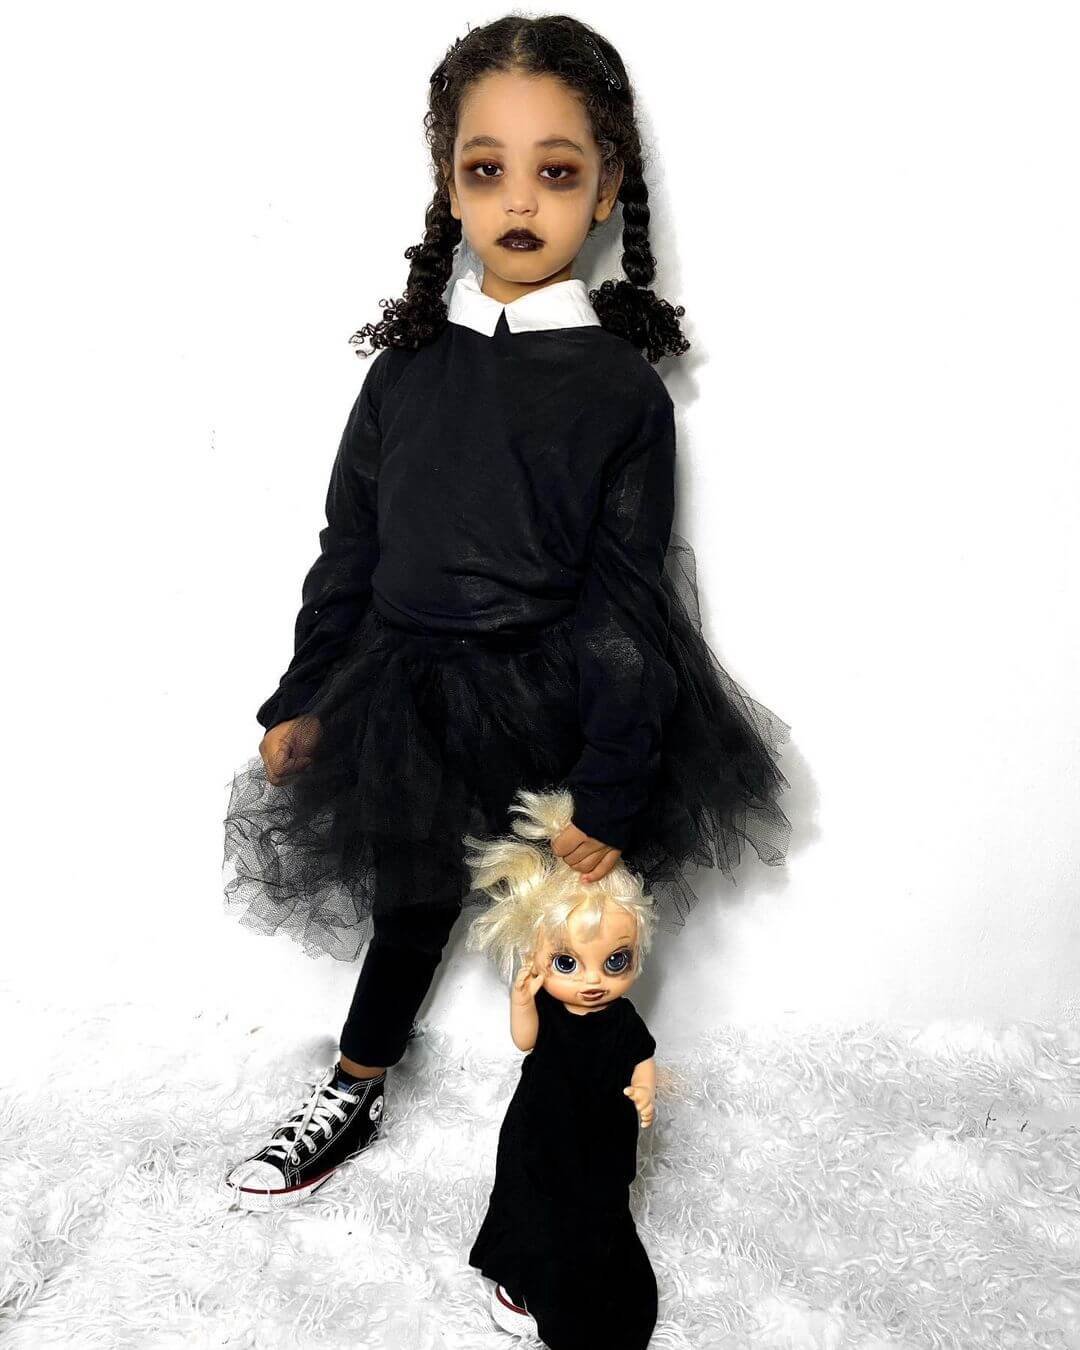 Black dress with long neatly combed hair will make scary Halloween costumes for kids